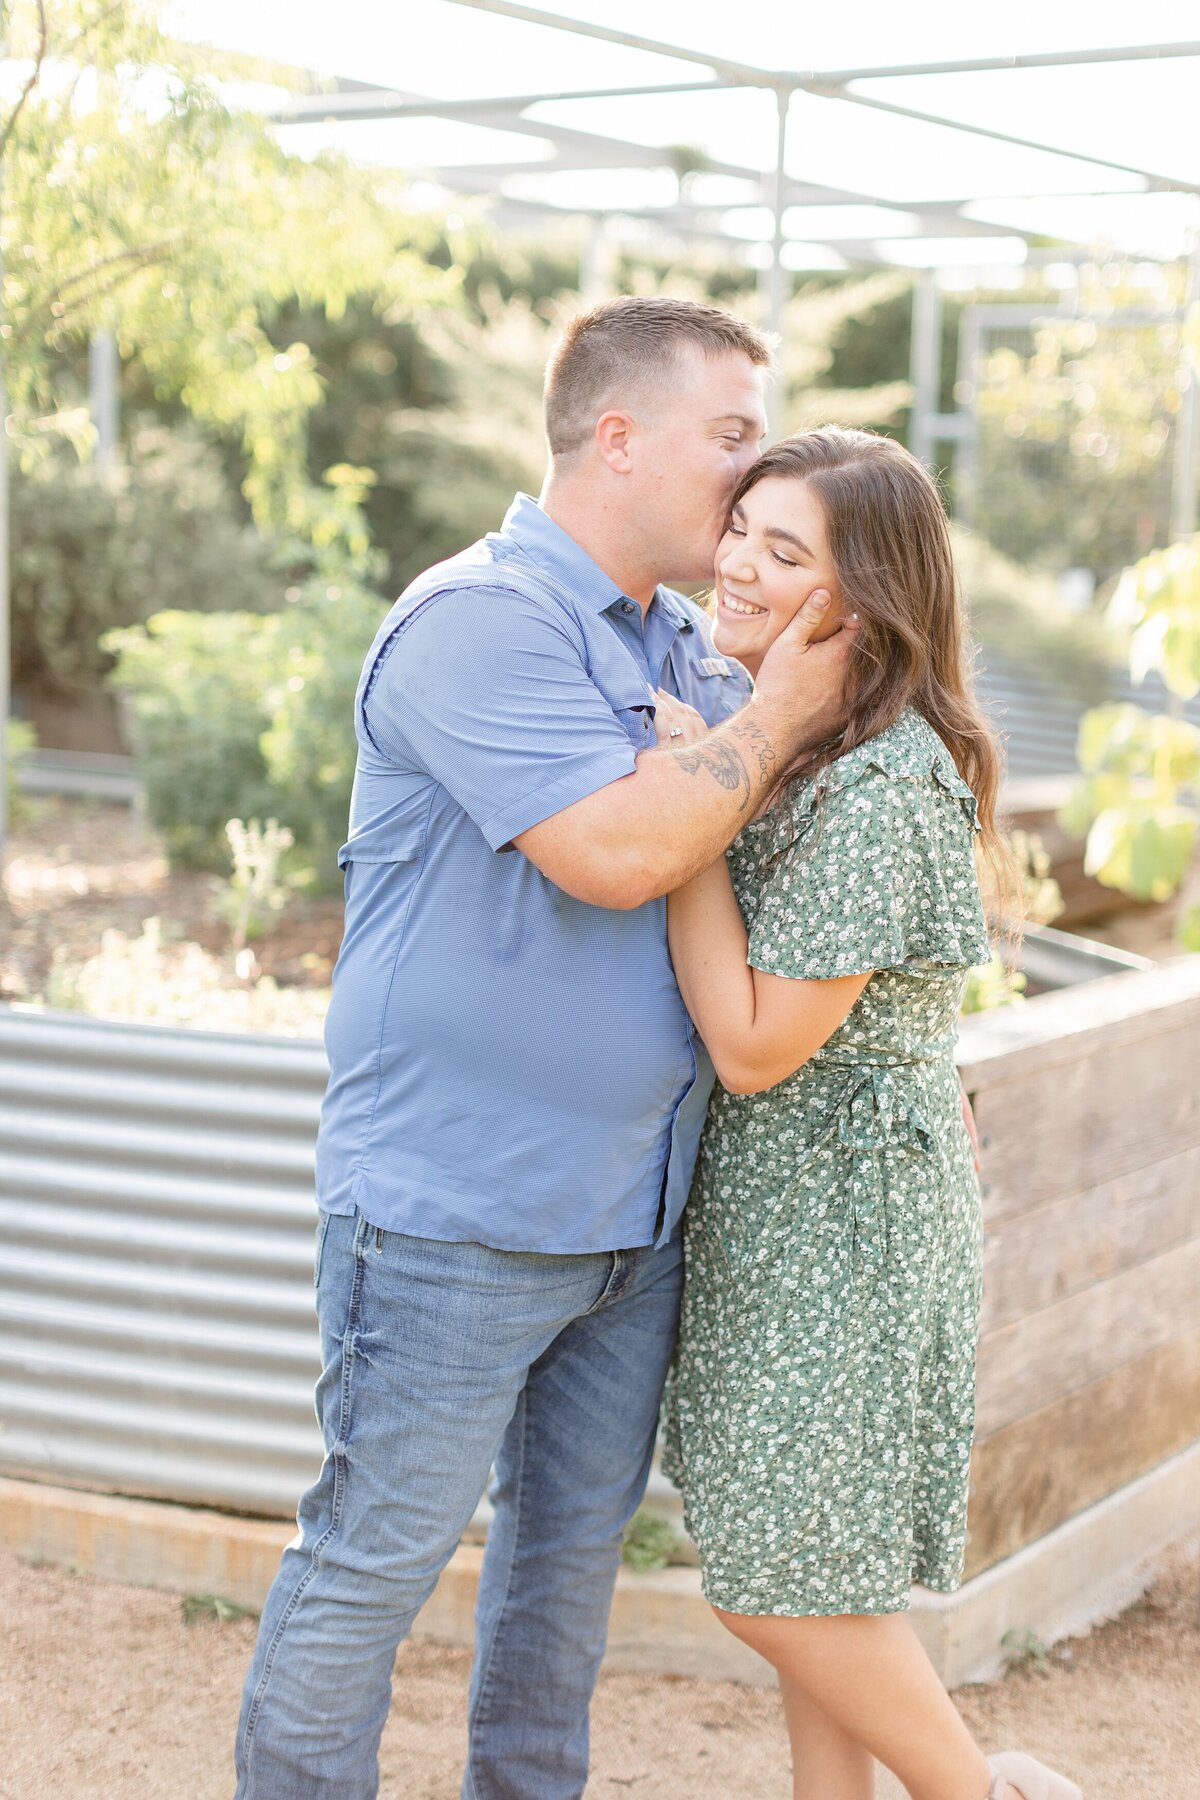 McGovern Centennial Gardens Engagement Photography Bright Airy Smiles